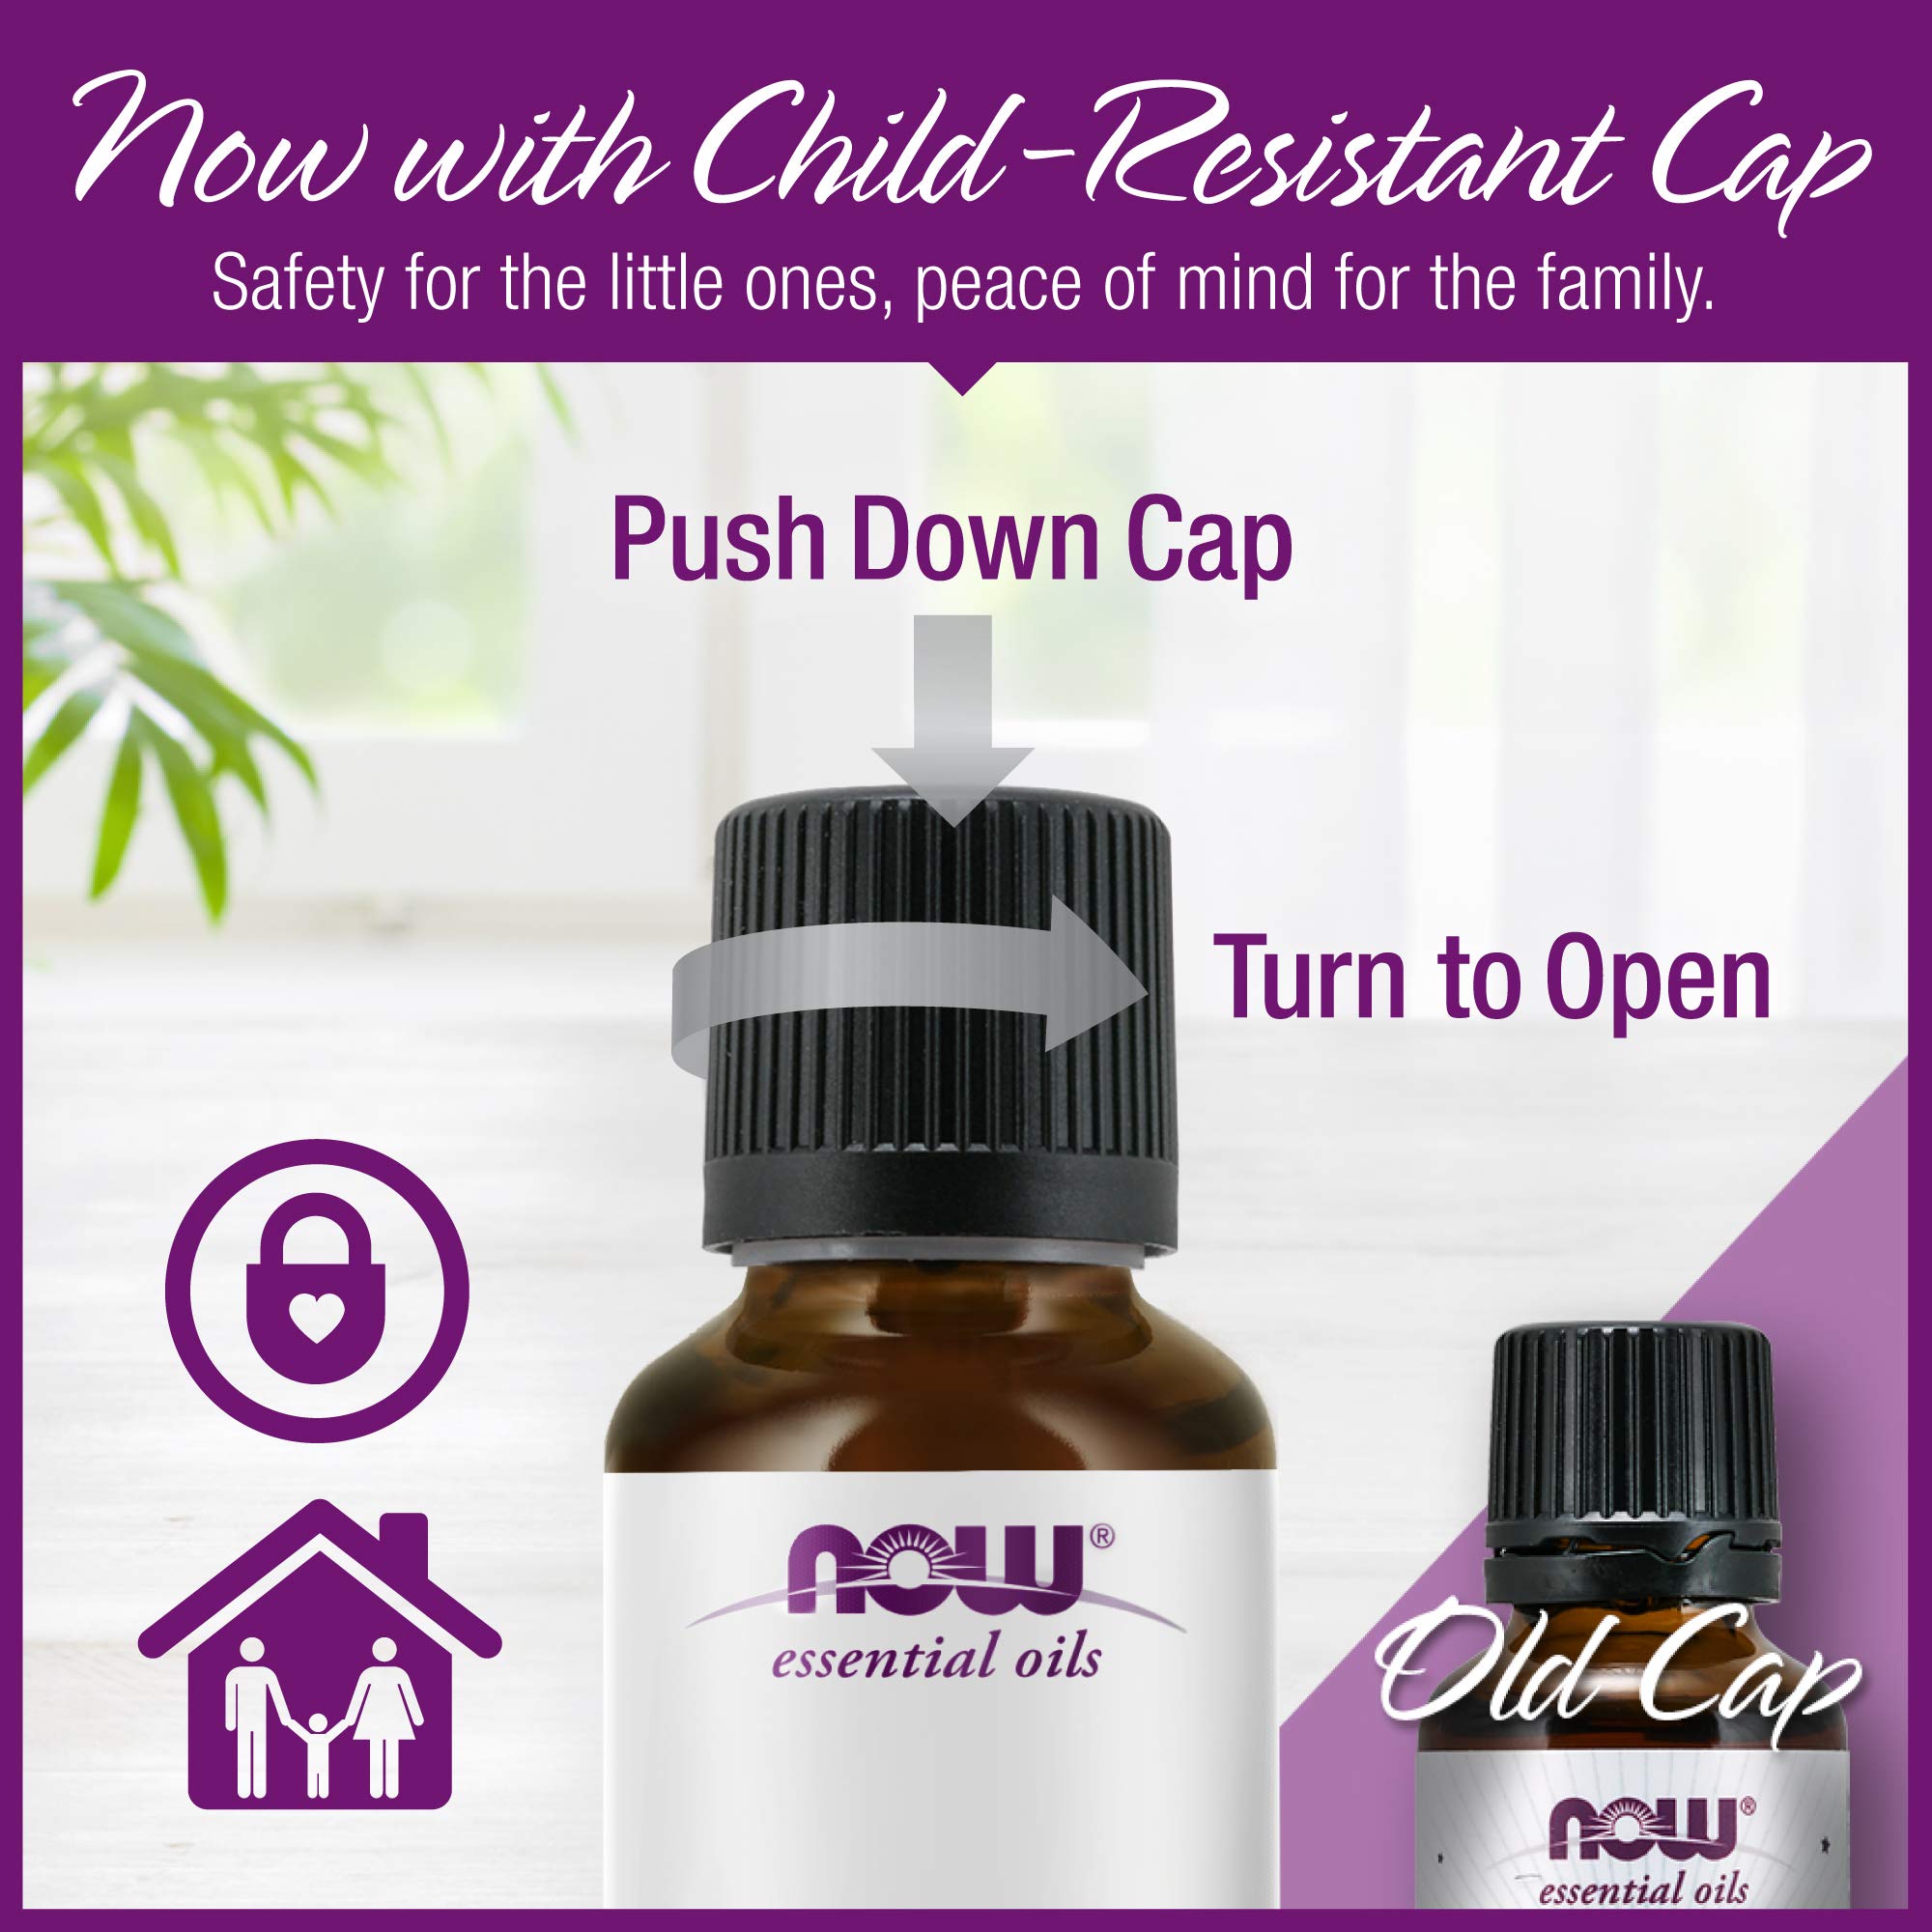 NOW Essential Oils, Orange Oil, Uplifting Aromatherapy Scent, Cold Pressed, 100% Pure, Vegan, Child Resistant Cap, 4-Ounce